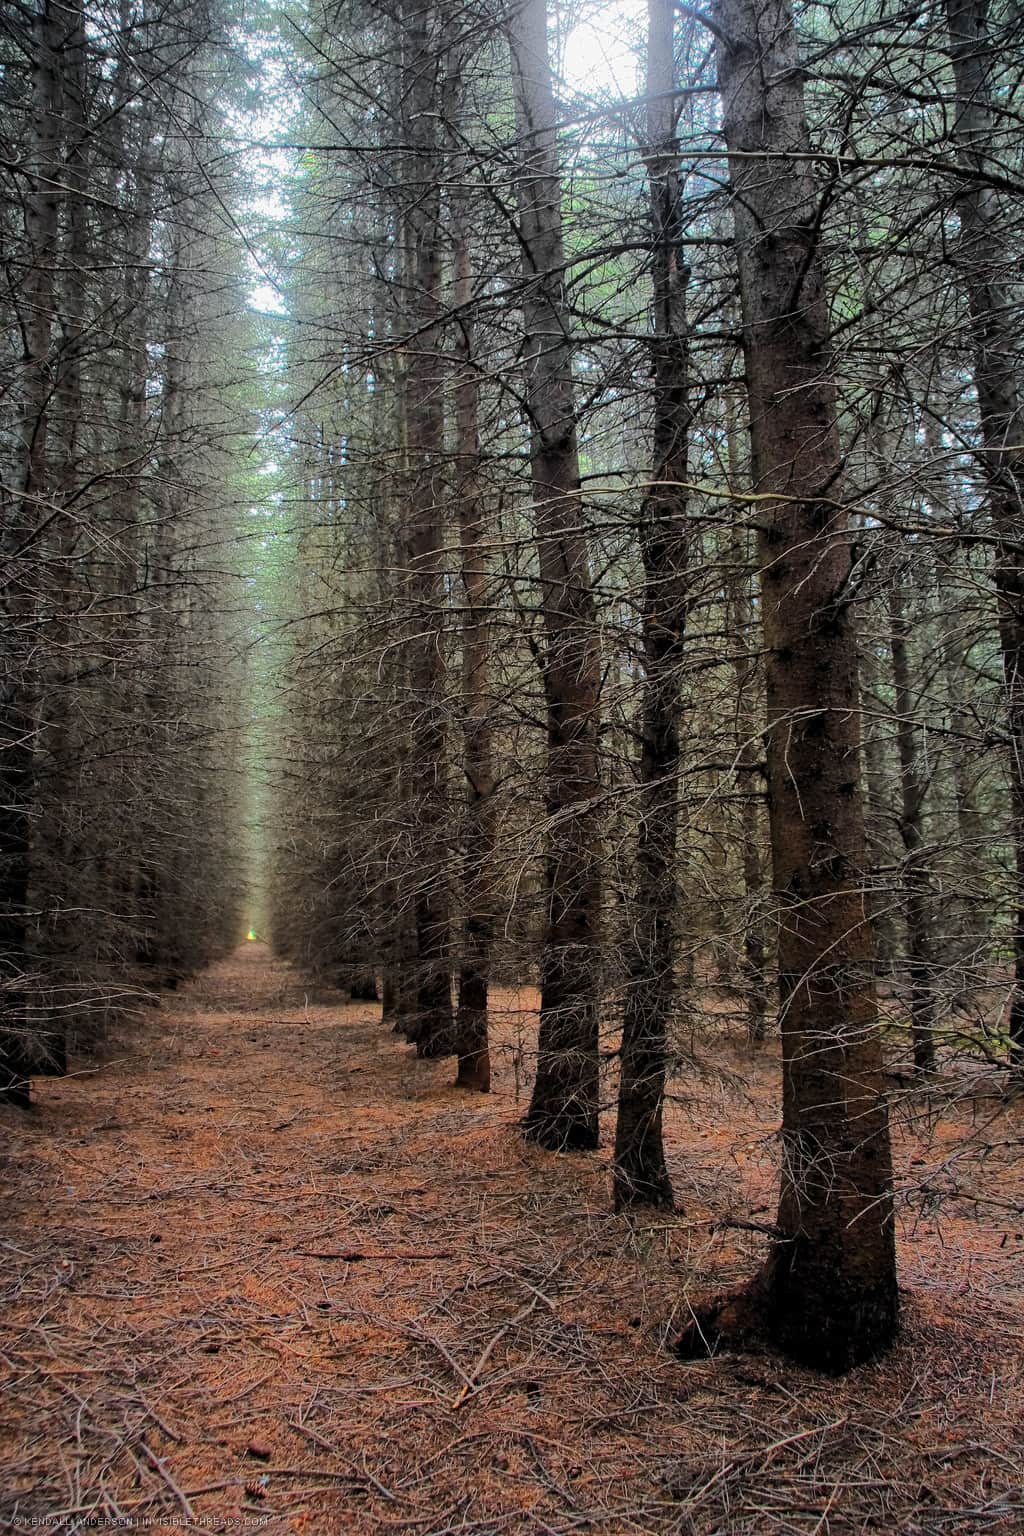 A dense forest of tall trees, forming corridors in the forest. The ground is covered with dropped pine needles.